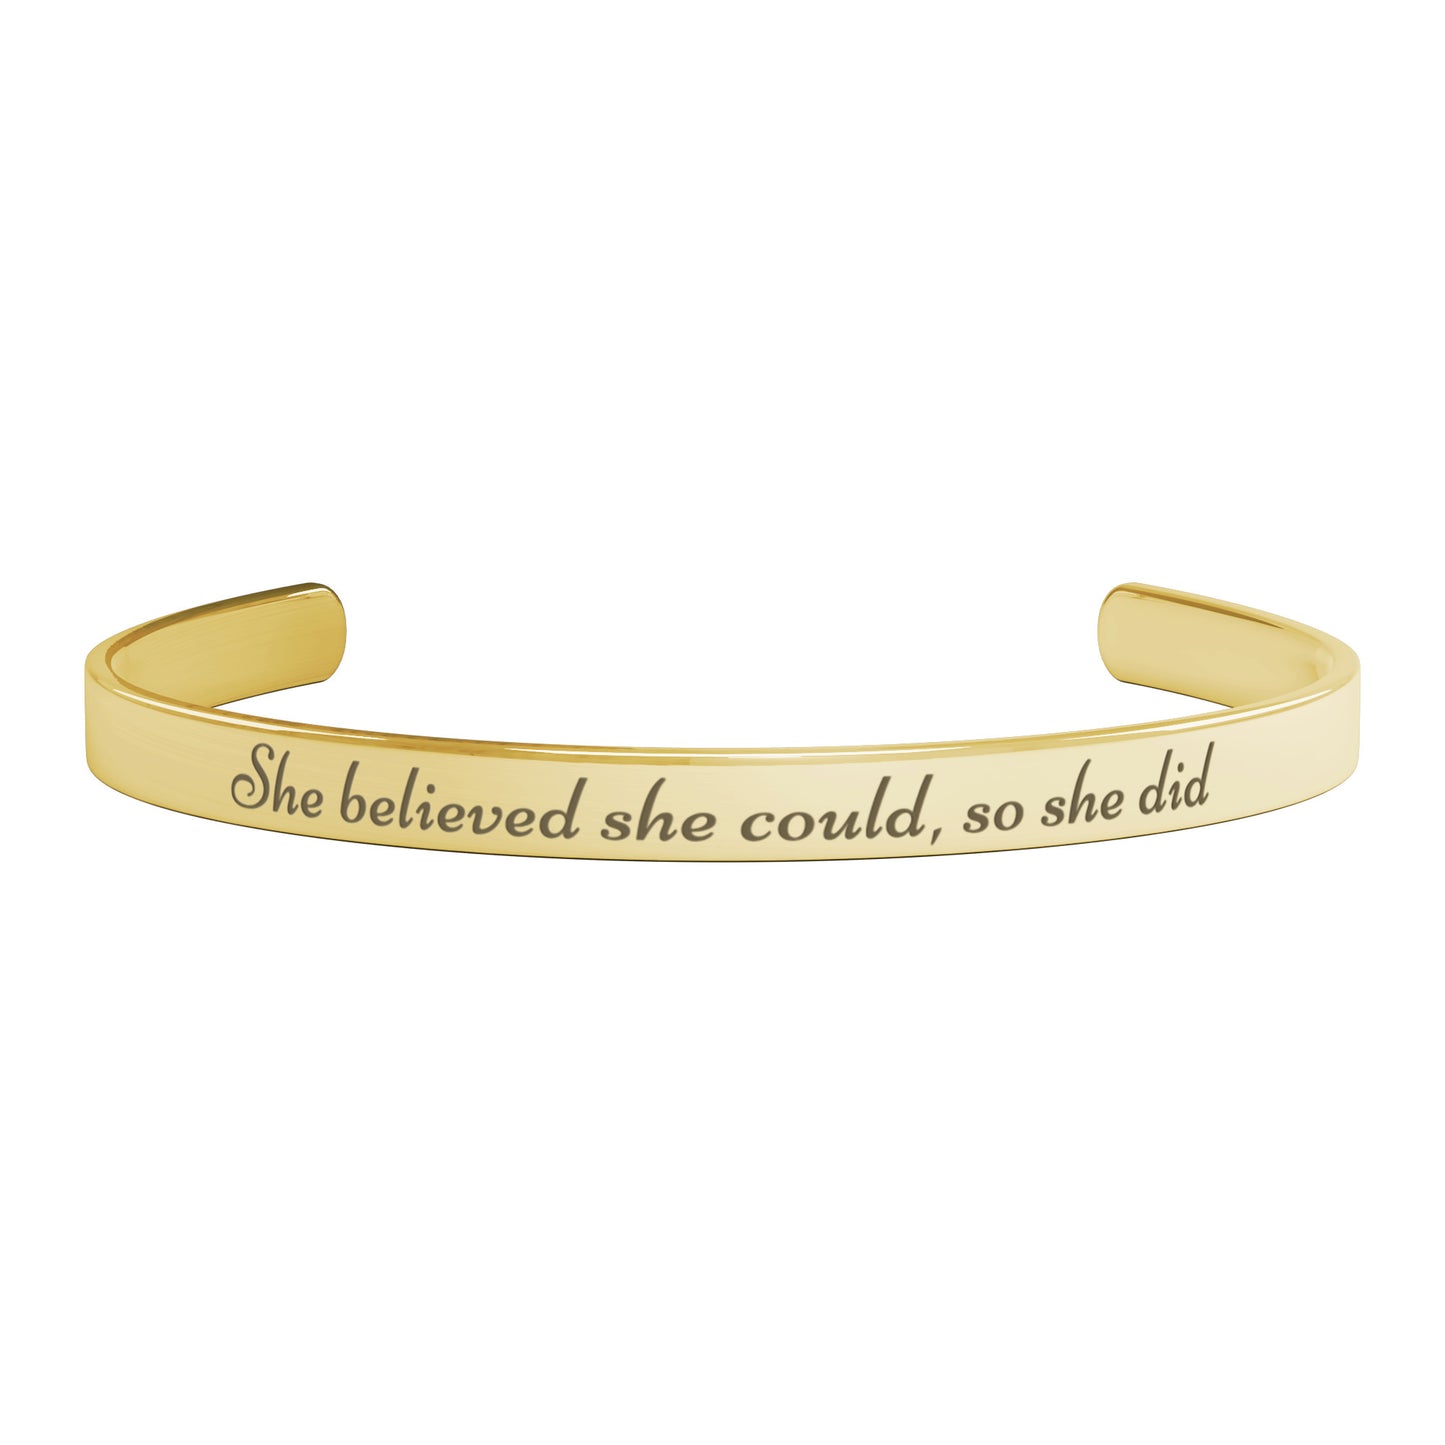 She Believed She Could, So She Did Cuff Bracelet - FREE SHIPPING